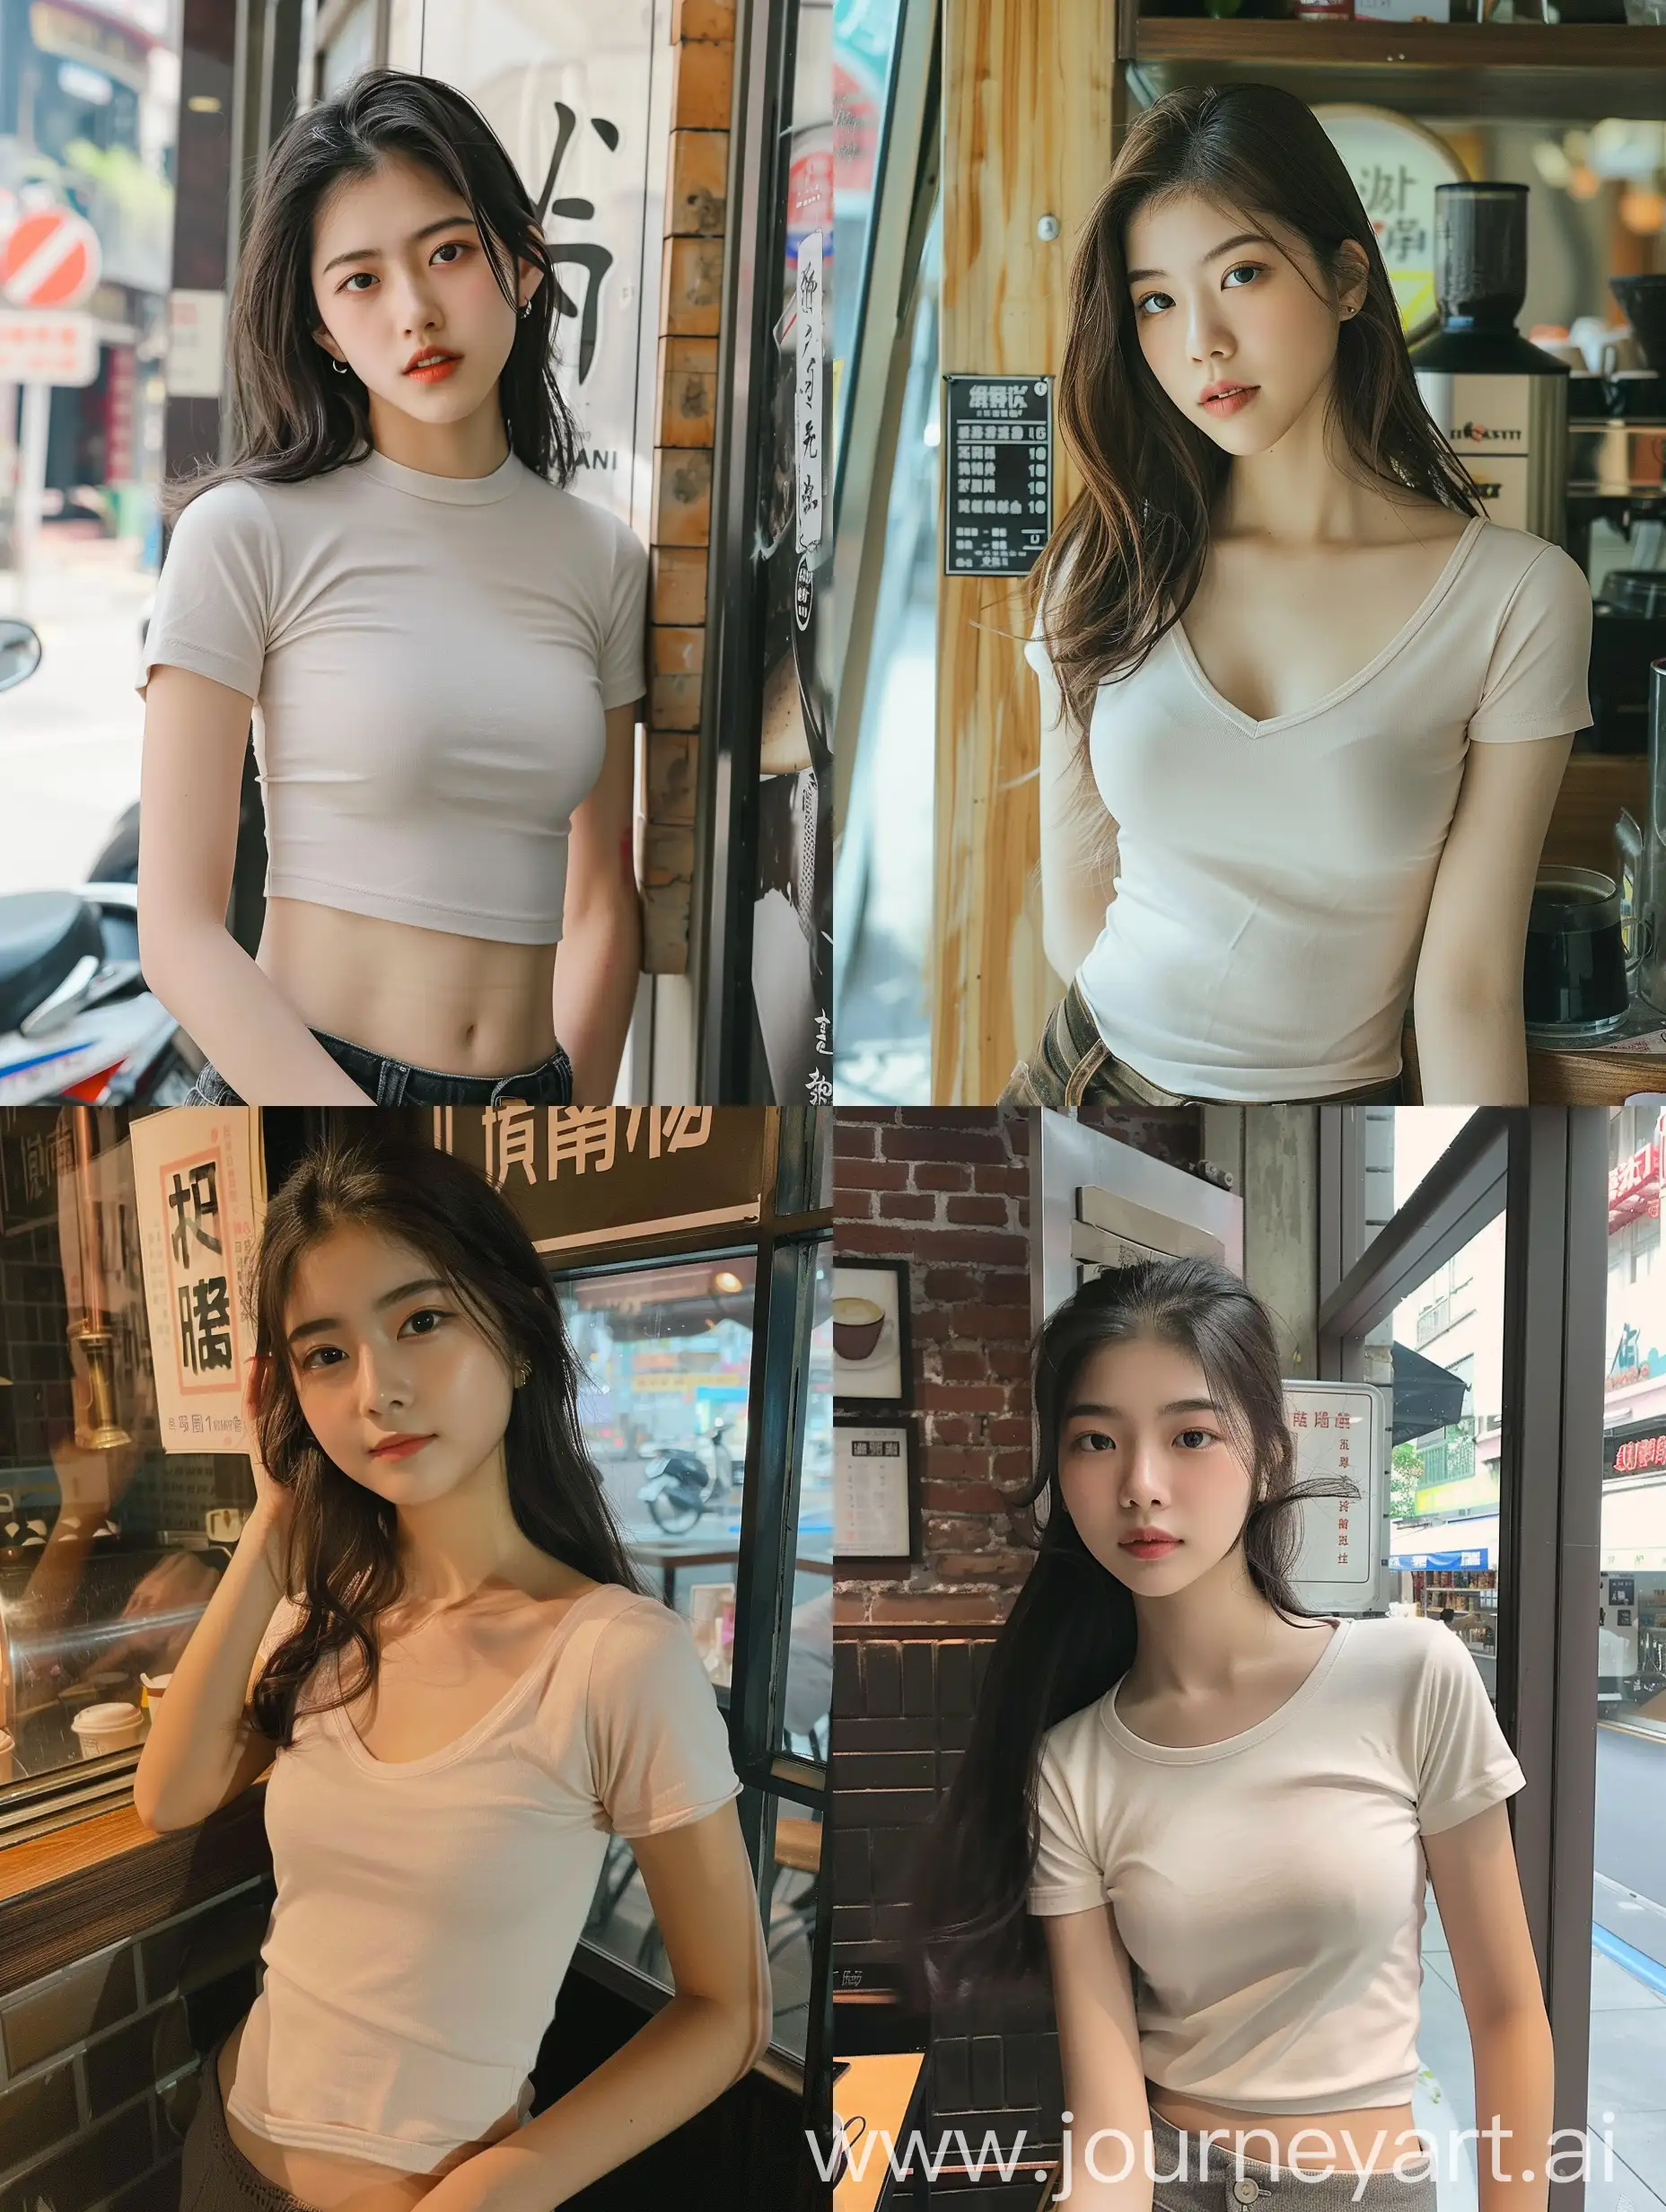  Cute 16 year old Taiwanese girl wearing a plain muted white colored tight T-shirt with a low neckline, posing for a photo in a coffee shop next to a sign